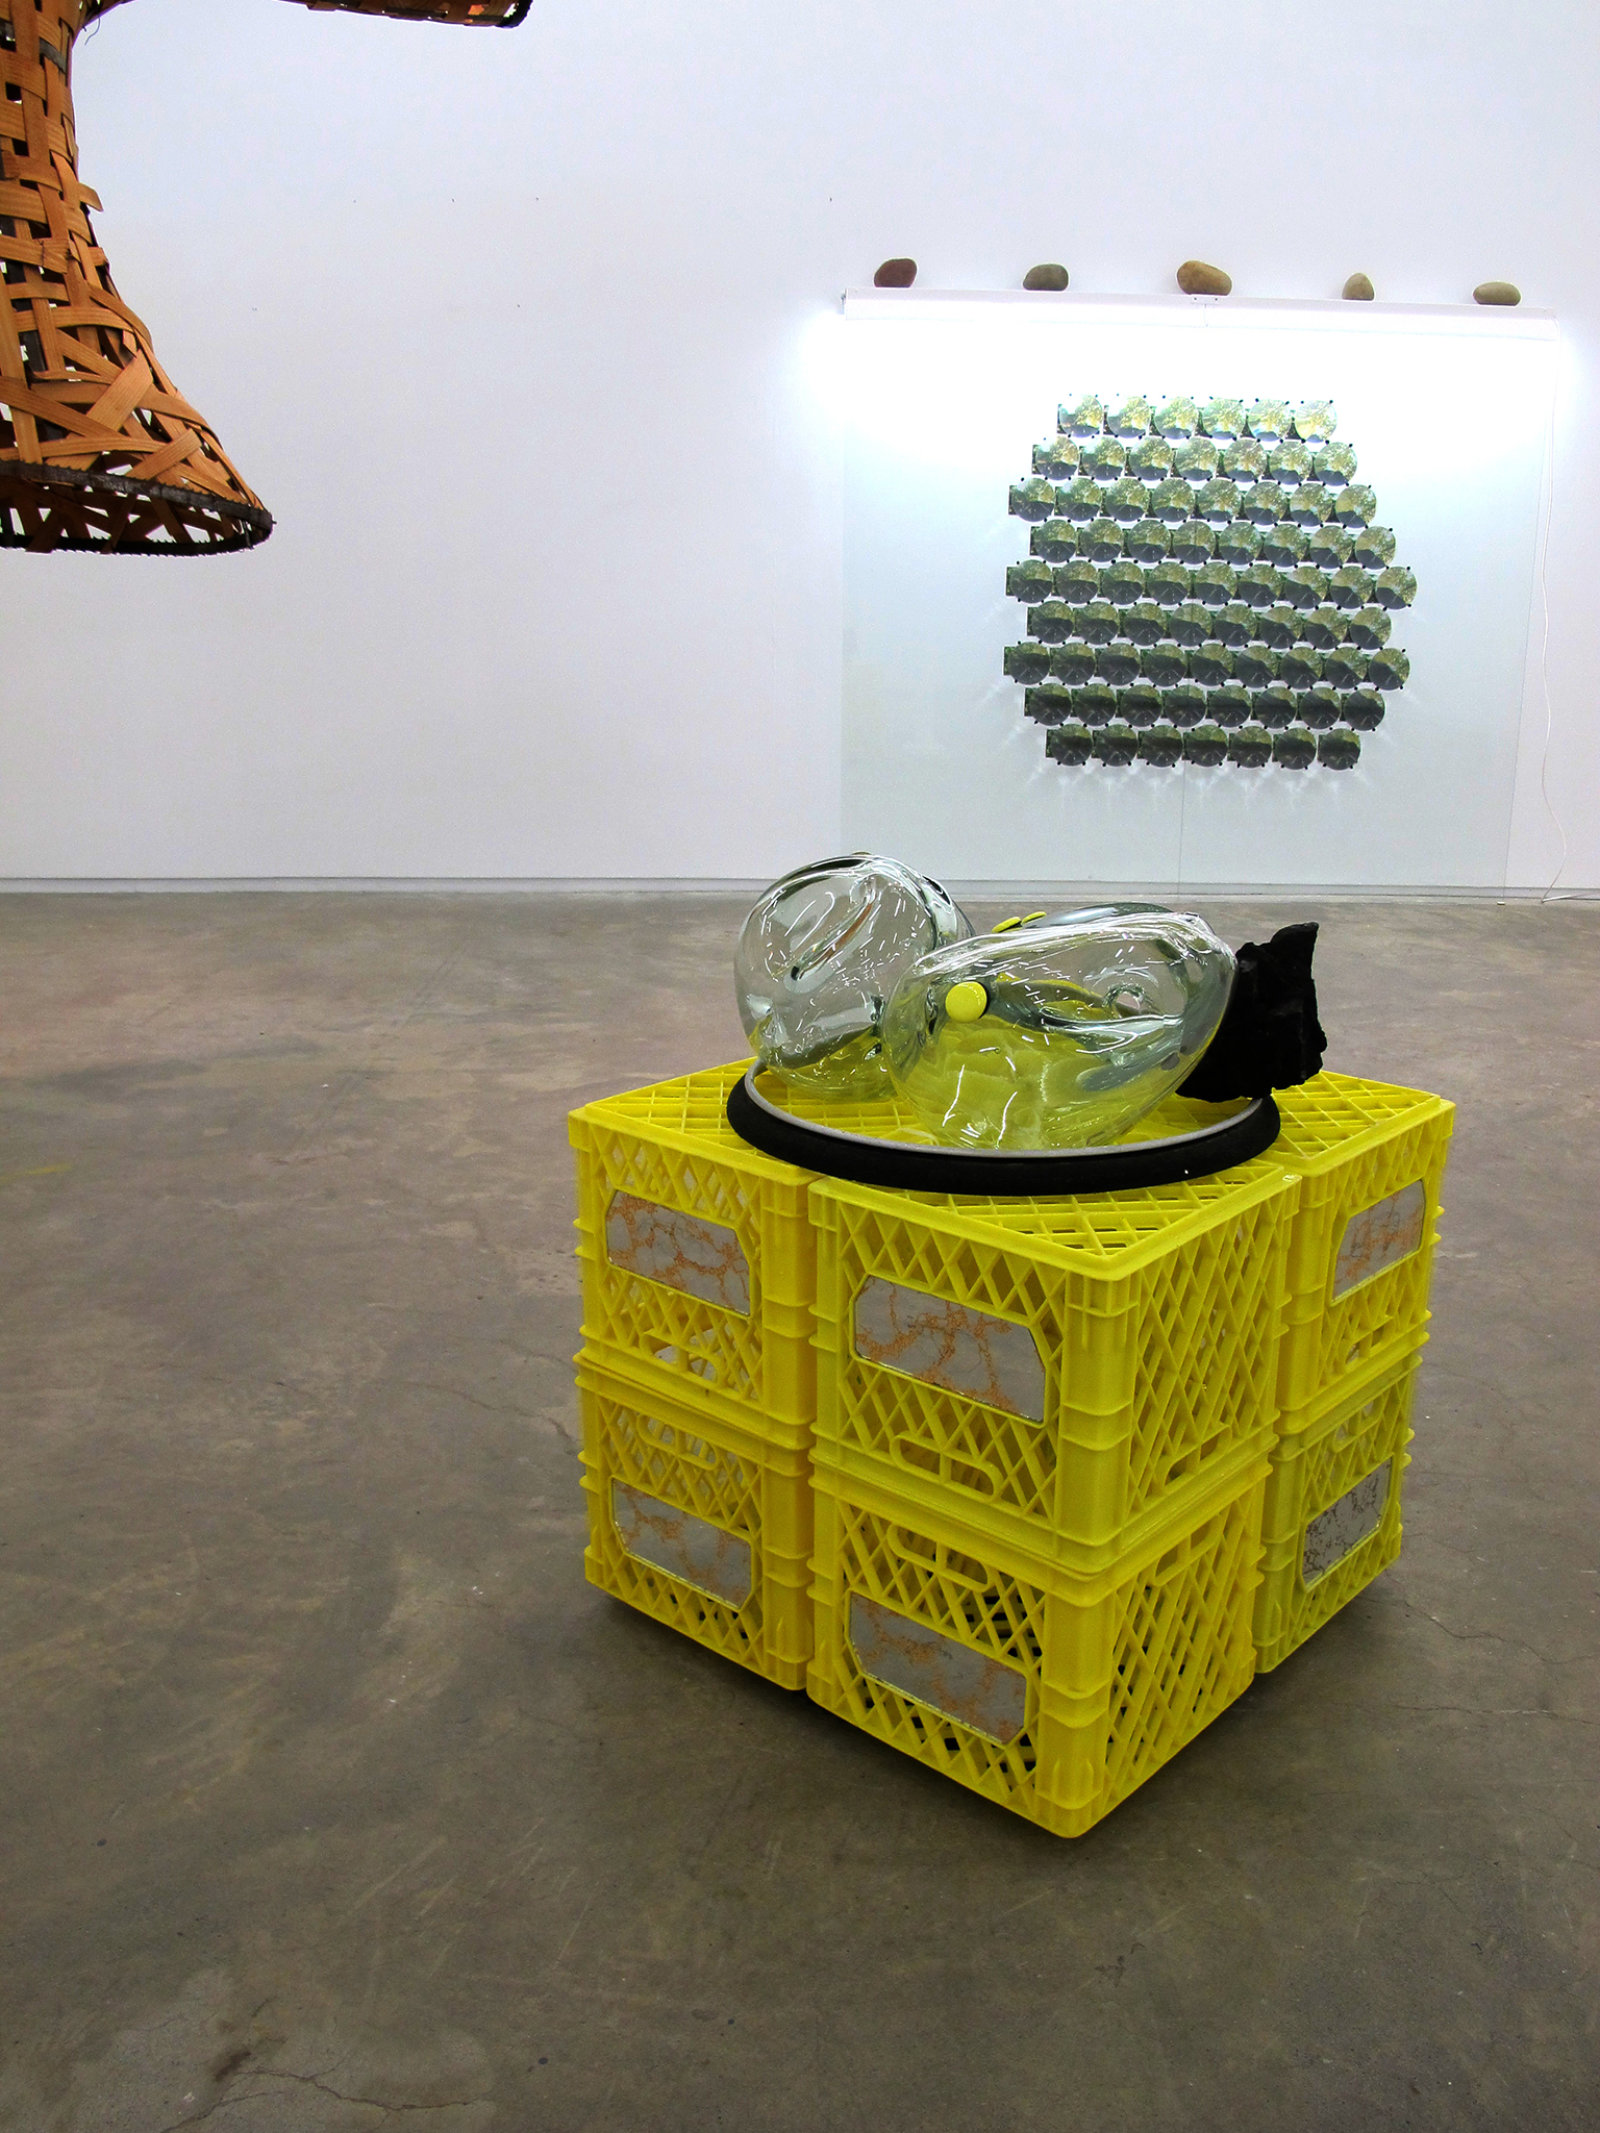 Jerry Pethick, Semaphore Goya (detail), 1991, woven wicker shirt, cable, milk crates, blown glass shapes, coal, aluminum ring, saw blades, glass, light fixtures, river rocks, photographs, fresnel lenses, mirrors, small yellow glass, 157 x 197 x 177 in. (399 x 500 x 450 cm)